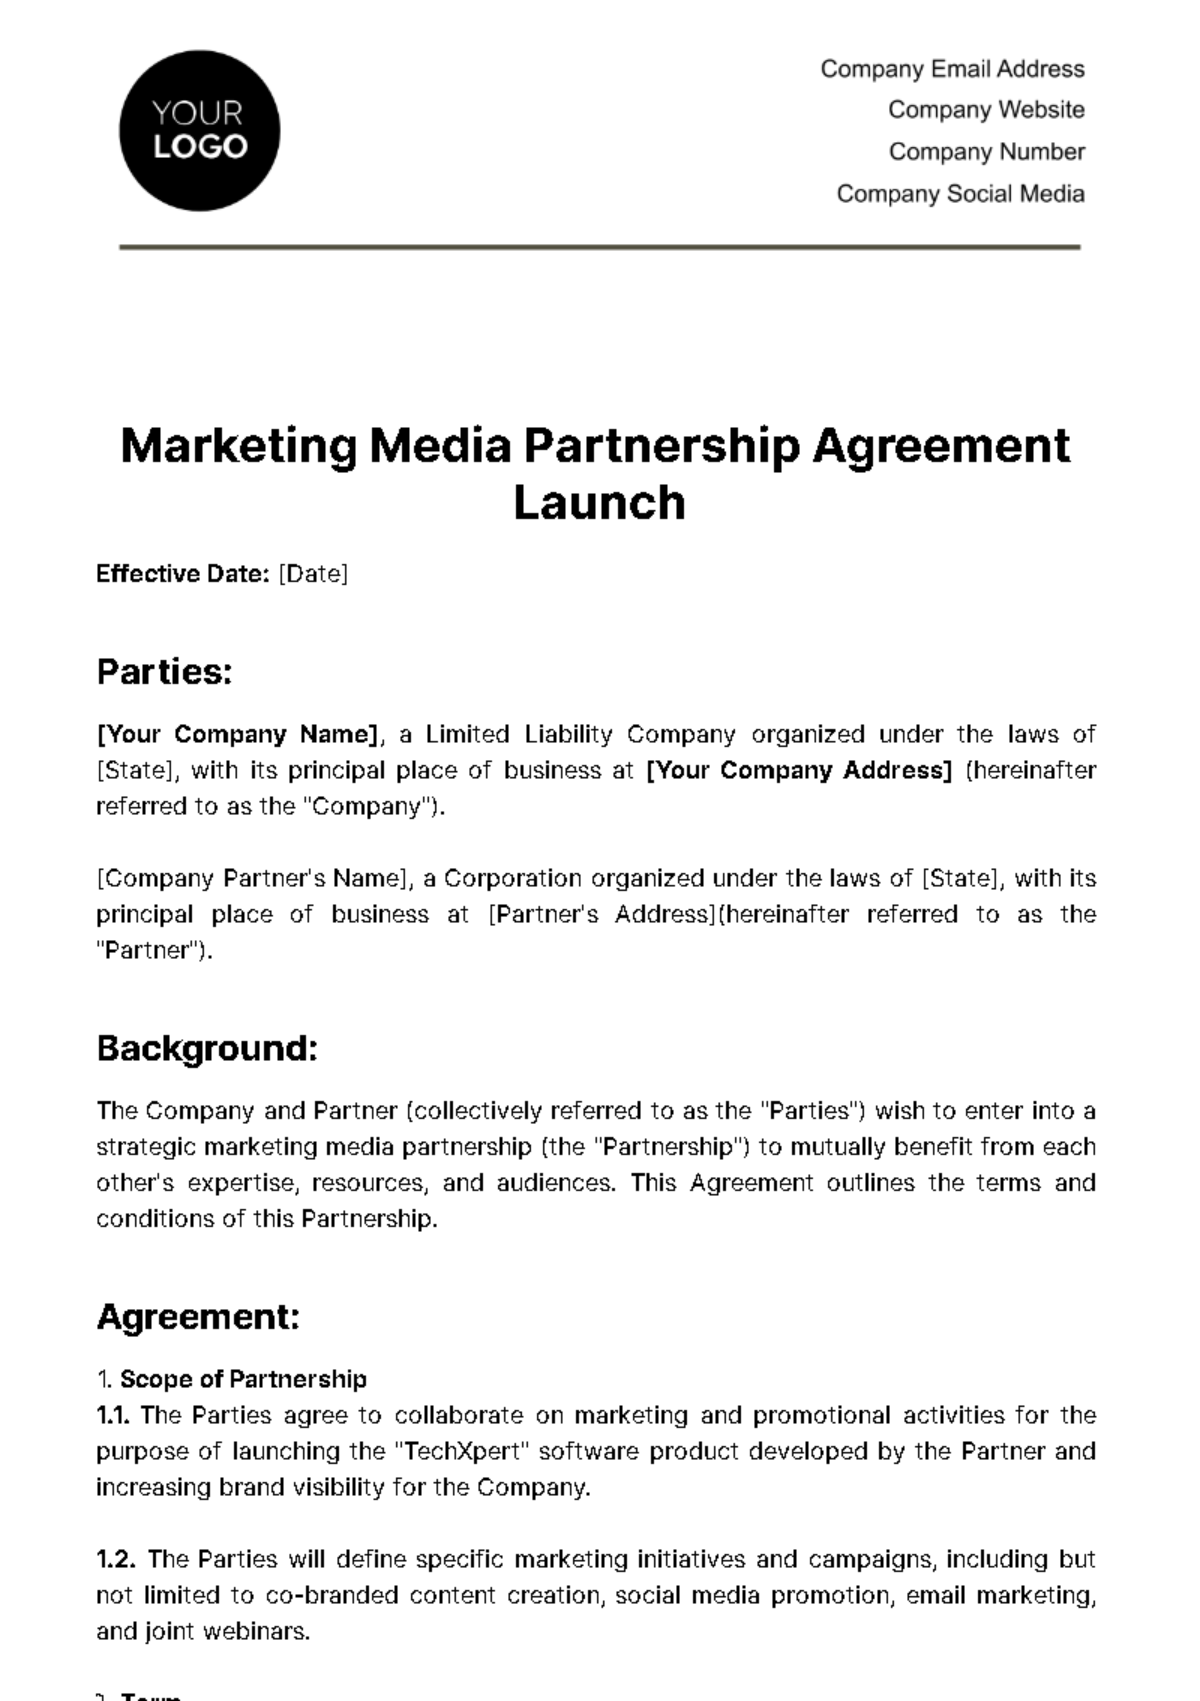 Free Marketing Media Partnership Agreement for Launch Template